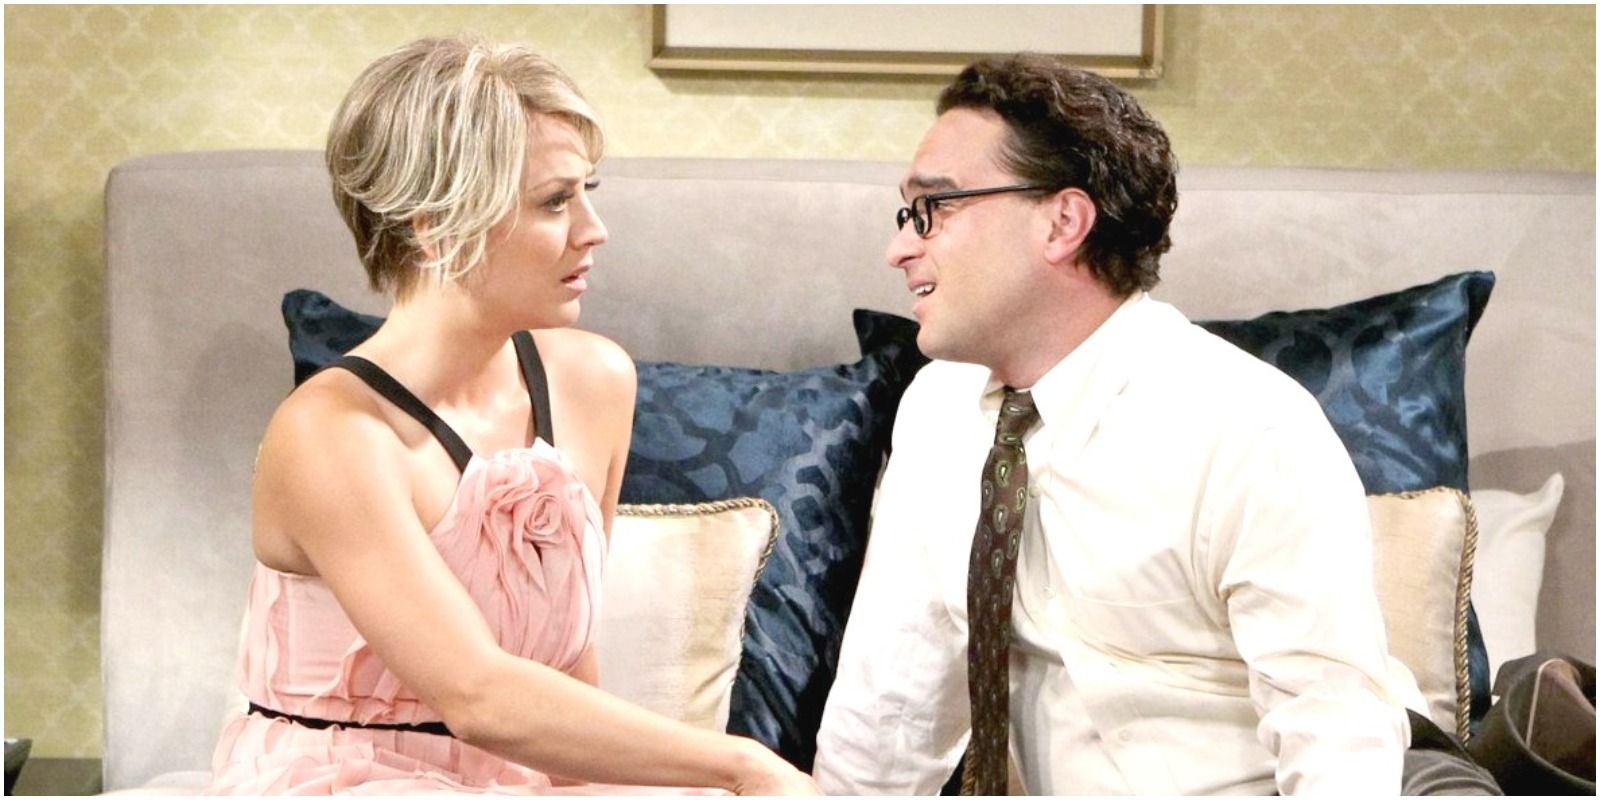 Leonard and Penny arguing on their wedding night from The Big Bang Theory